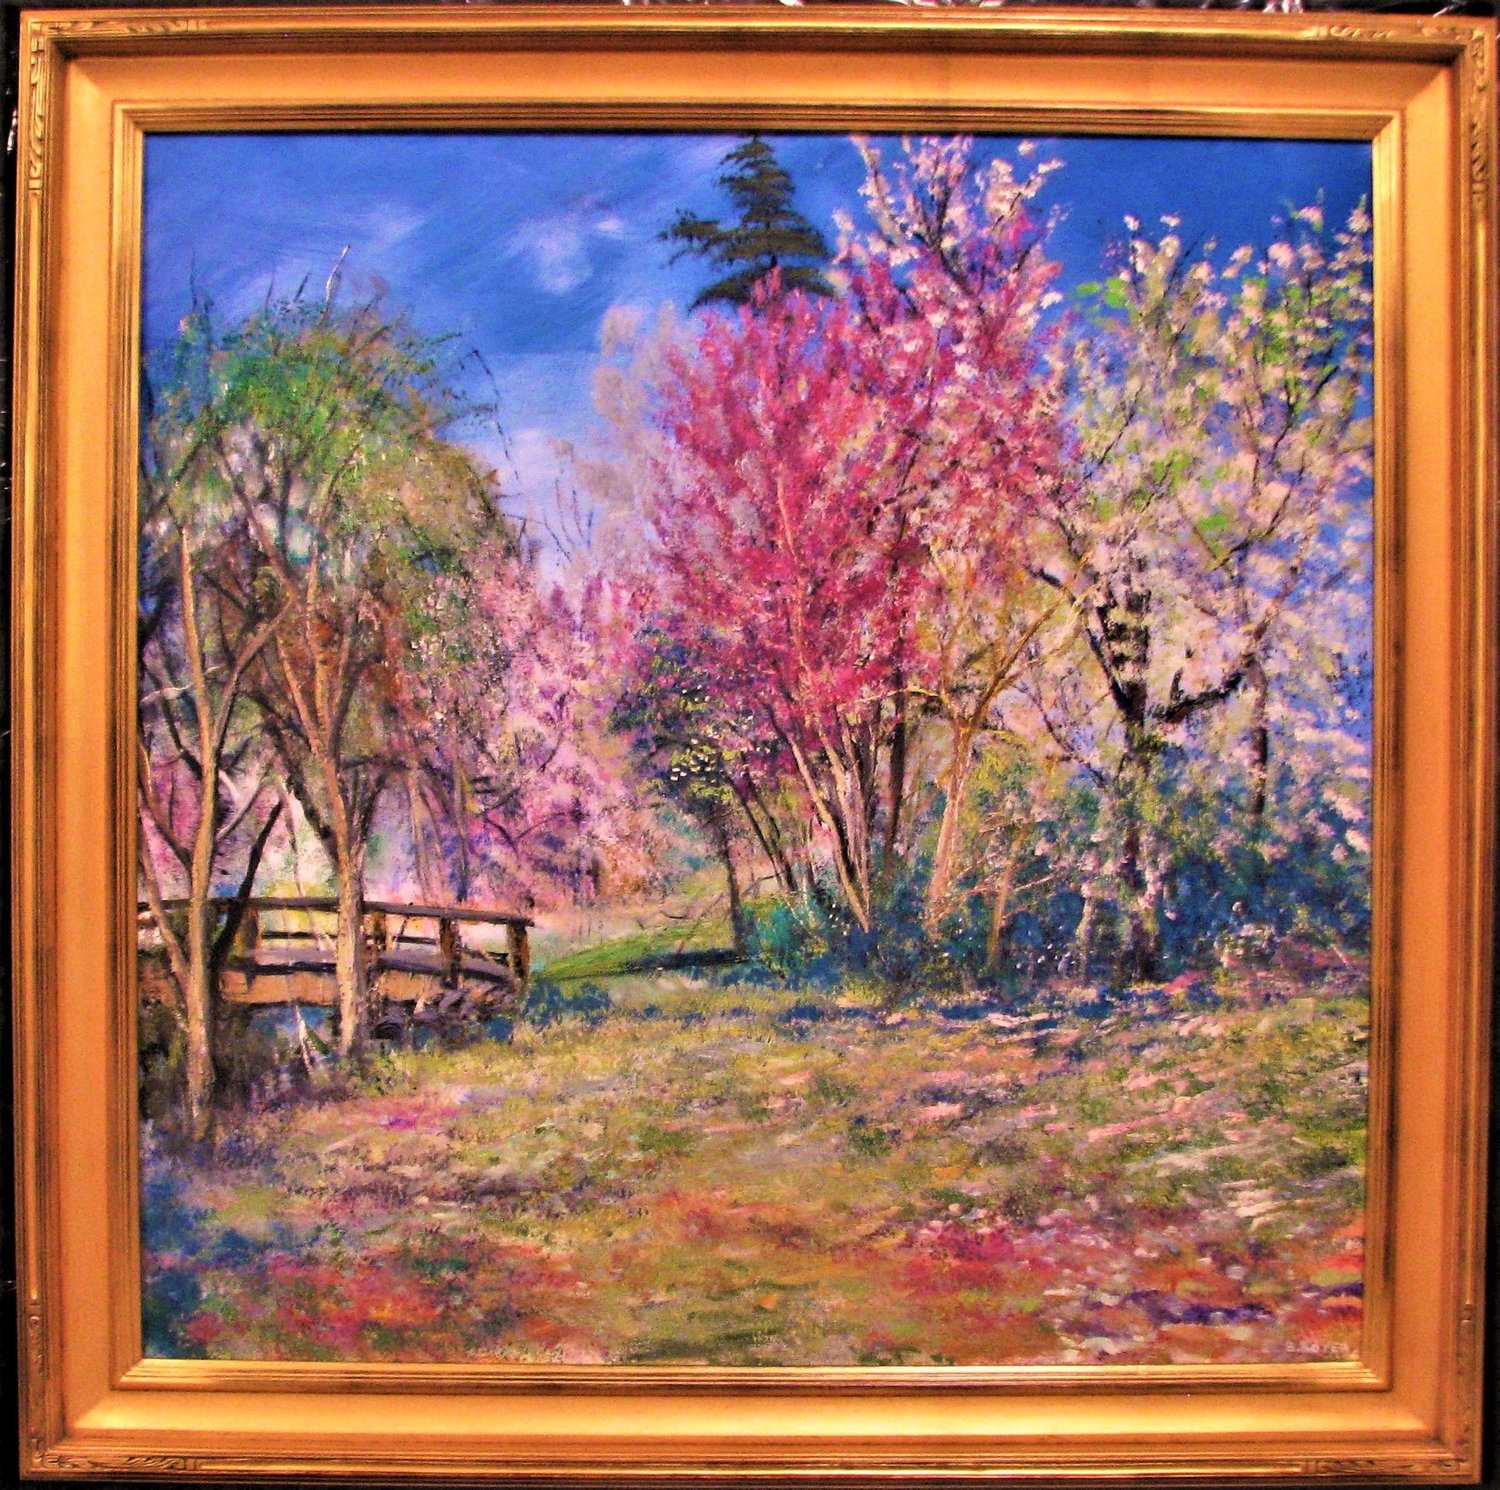 Impressionist artist Bradley Boyer’s painting, “Spring in the Valley,” a 36-inch by 36-inch oil on canvas, was the top lot at the Baum School Art Auction in Allentown on May 15.